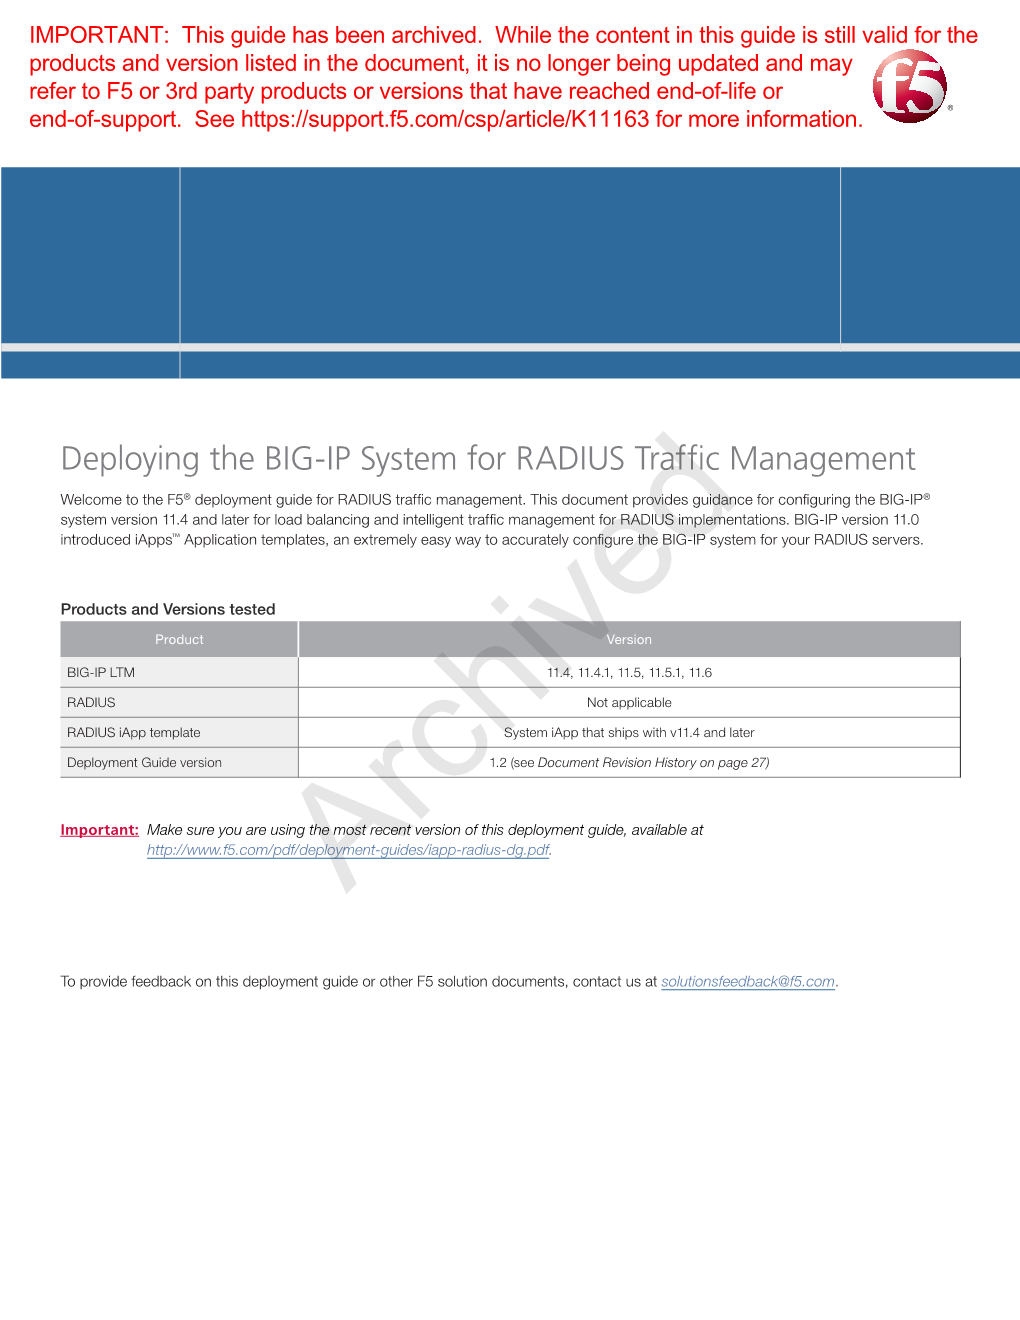 Deploying the BIG-IP System for RADIUS Traffic Management Welcome to the F5® Deployment Guide for RADIUS Traffic Management